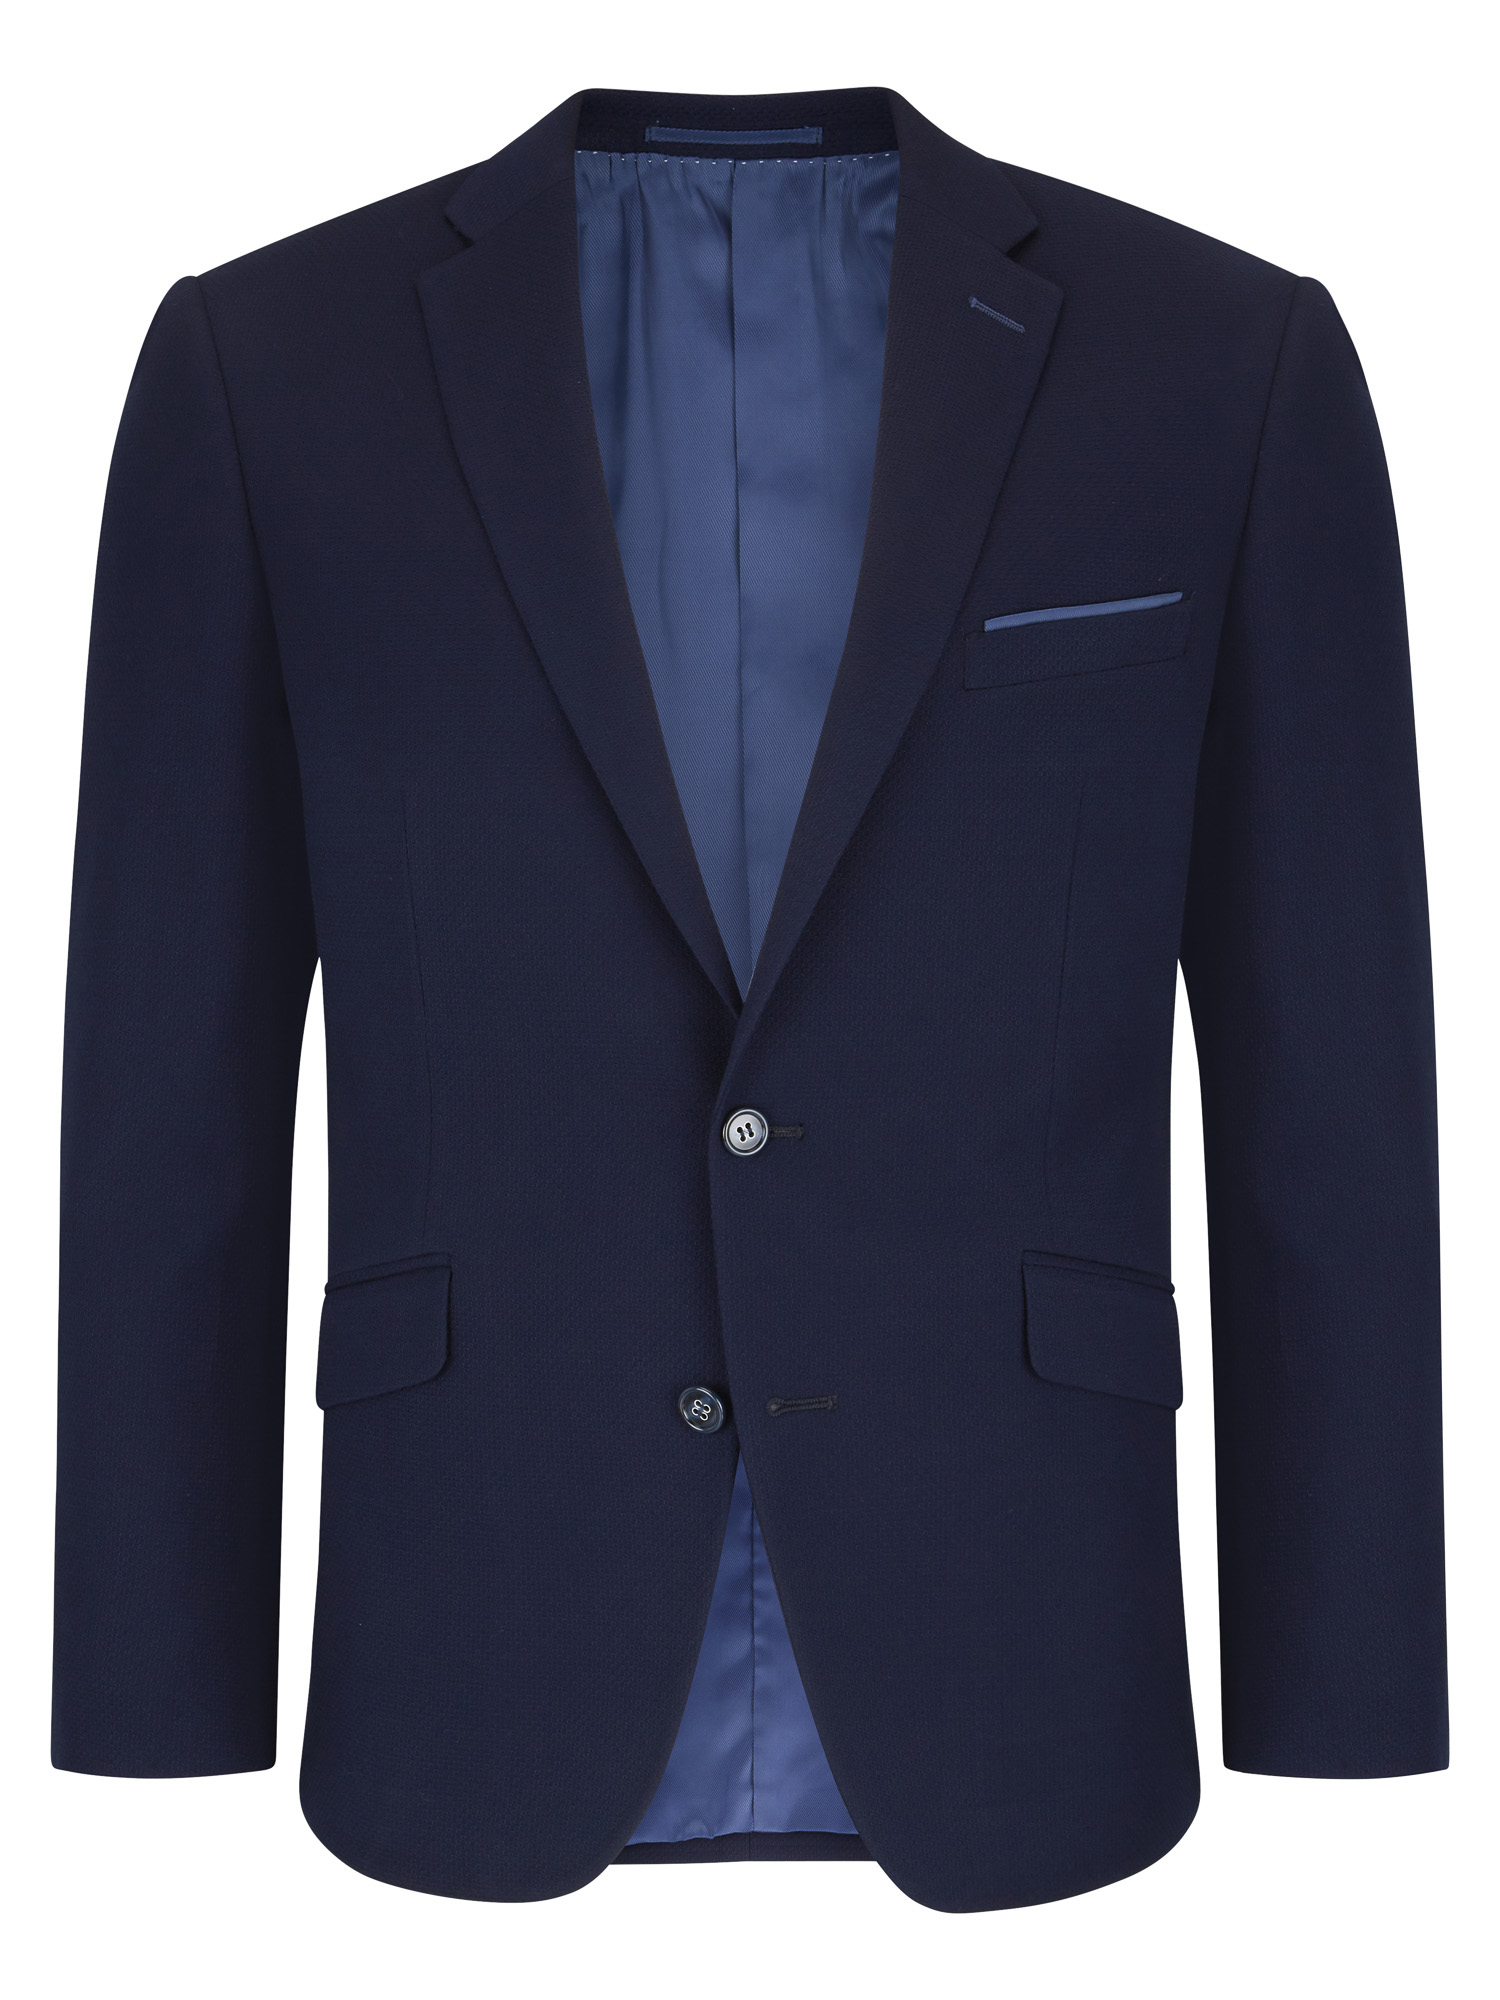 DG DALE BLAZER | Morans Menswear and Clothing, Thurles, Co. Tipperary